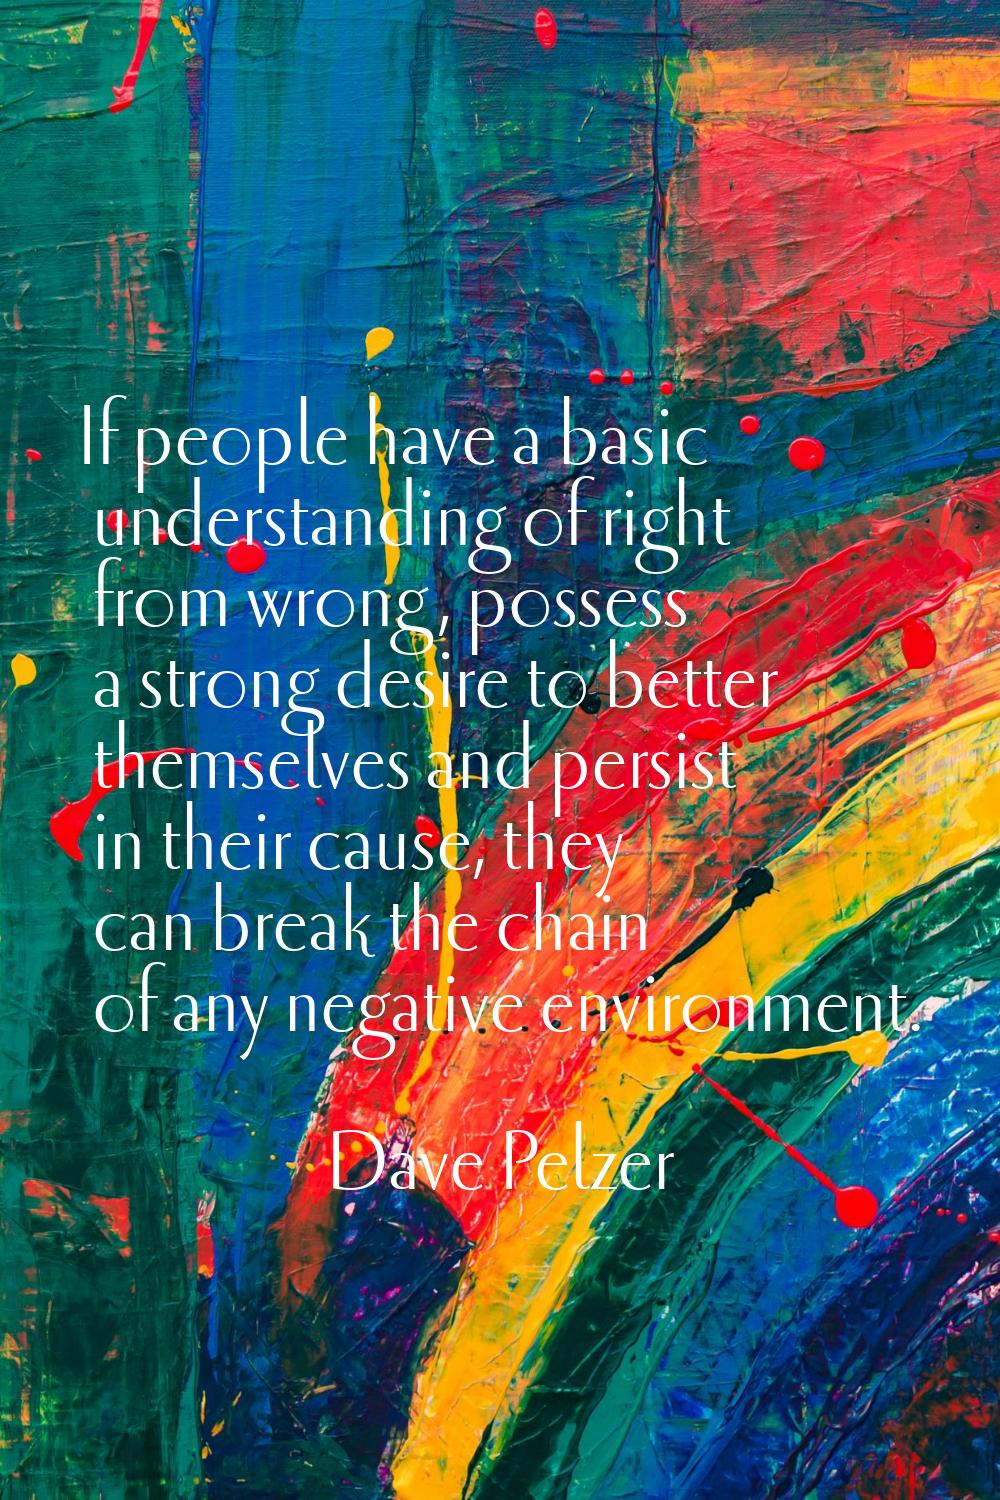 If people have a basic understanding of right from wrong, possess a strong desire to better themsel